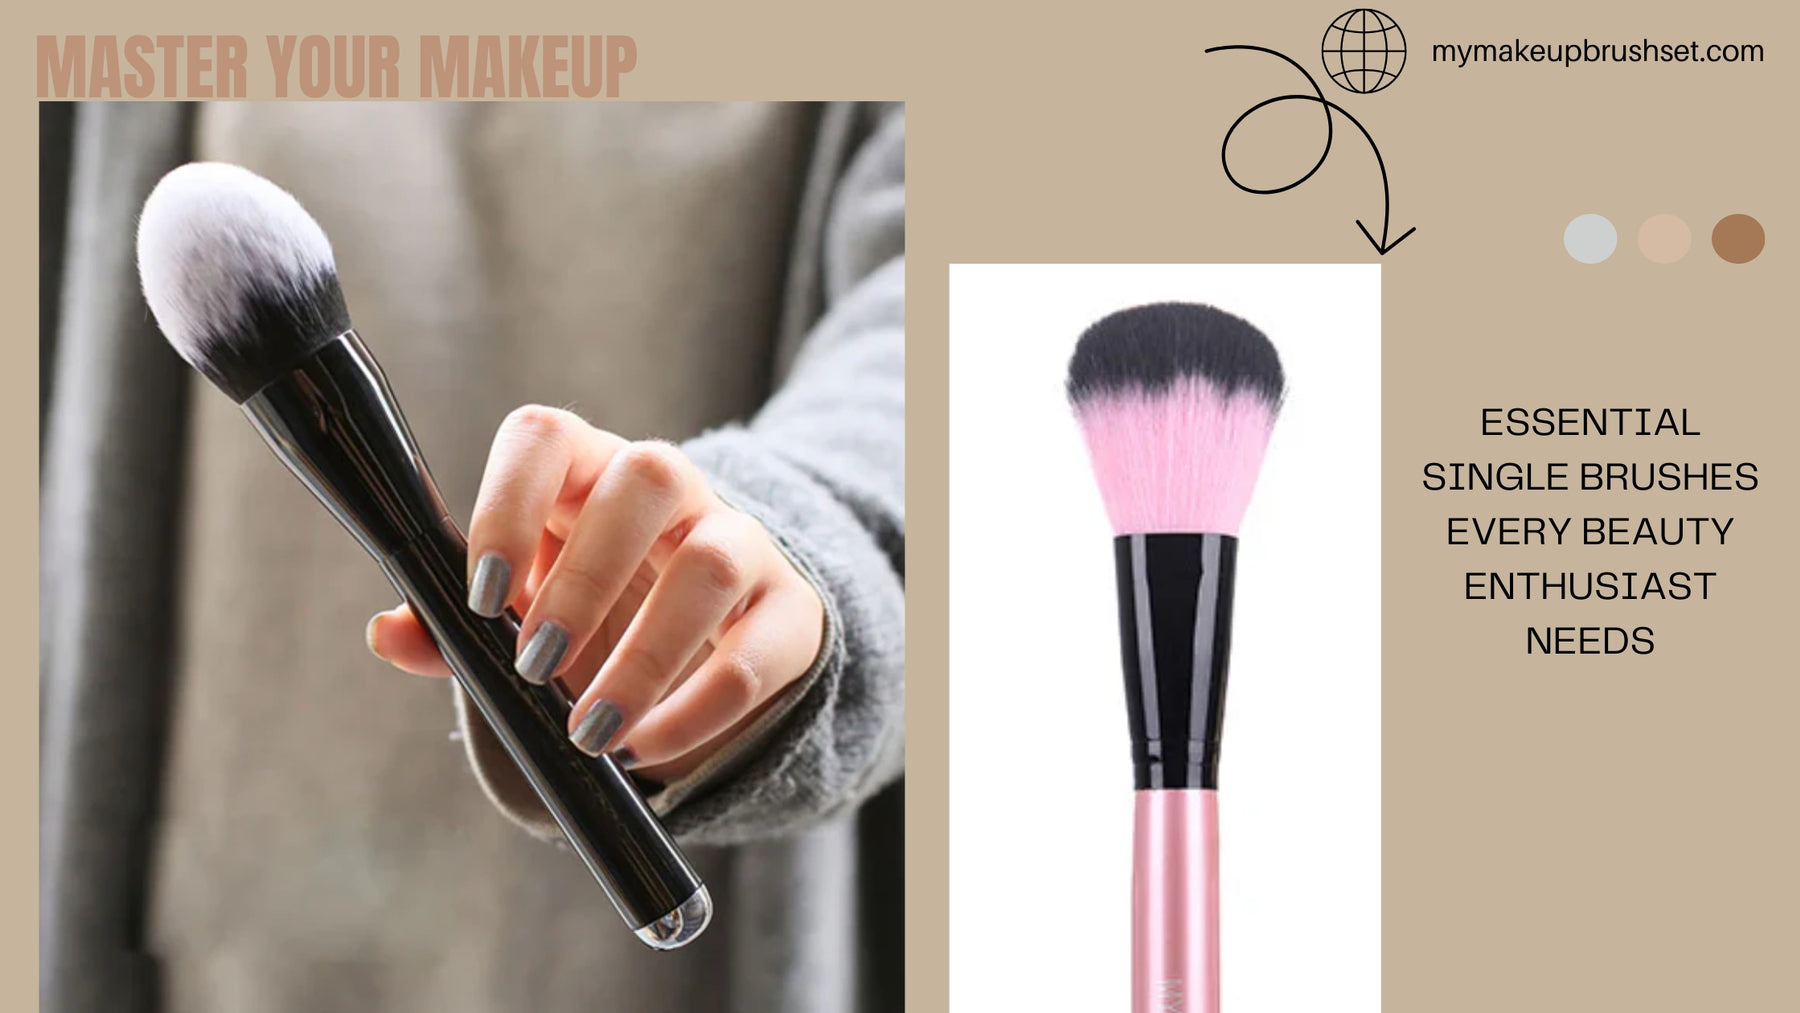 Master Your Makeup: Essential Single Brushes Every Beauty Enthusiast Needs